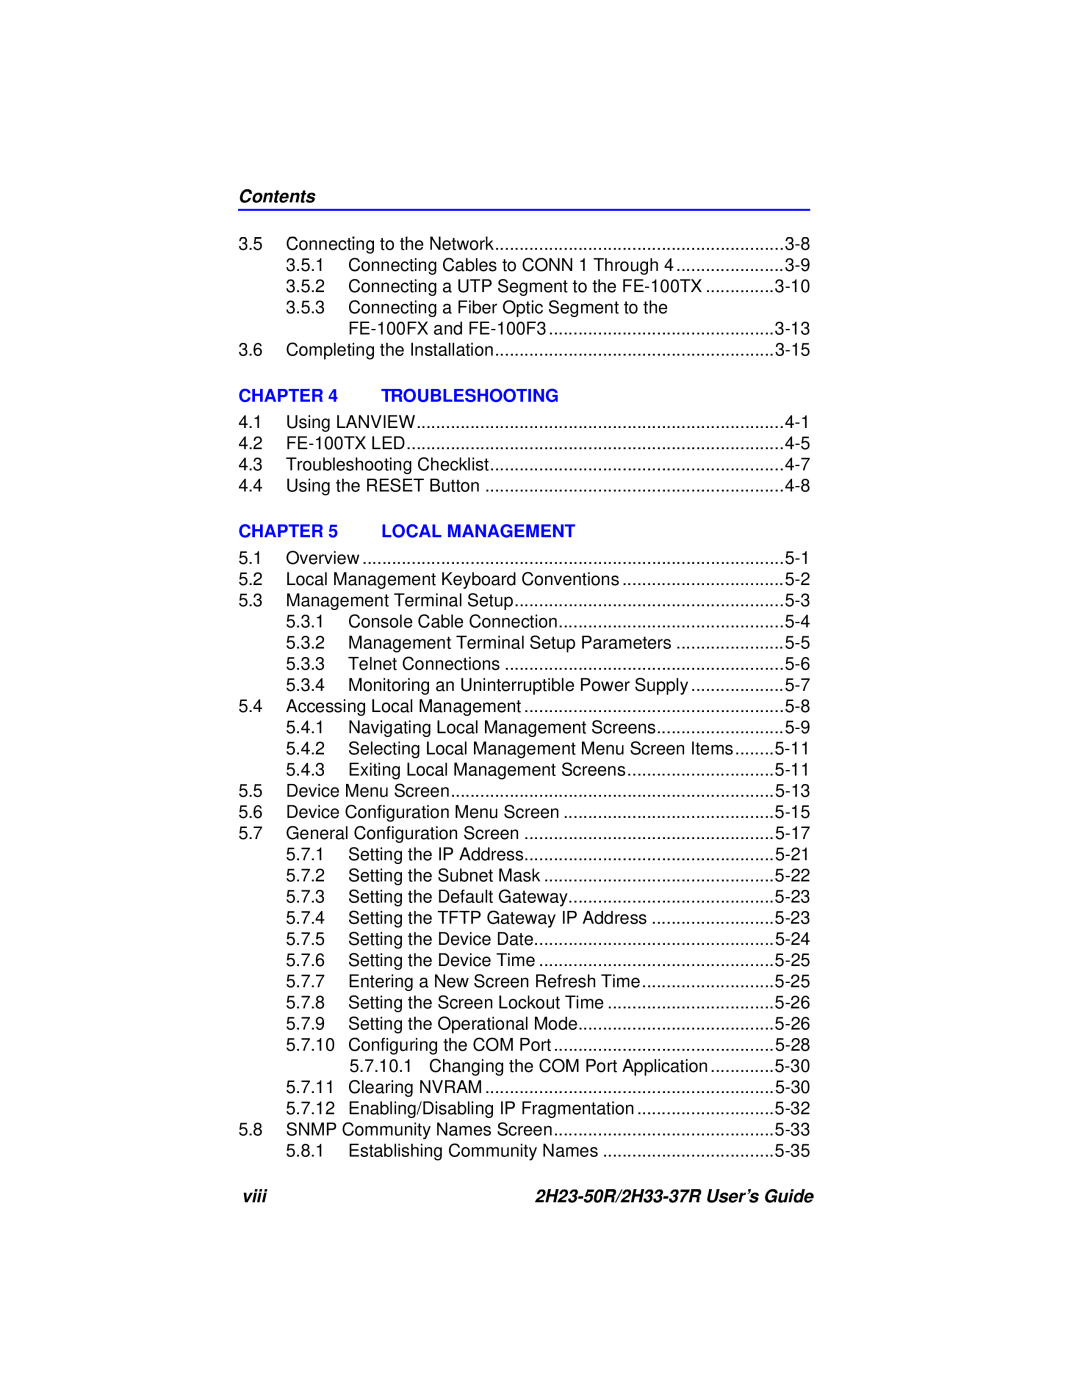 Cabletron Systems manual Contents, Chapter, Troubleshooting, Local Management, viii, 2H23-50R/2H33-37R User’s Guide 